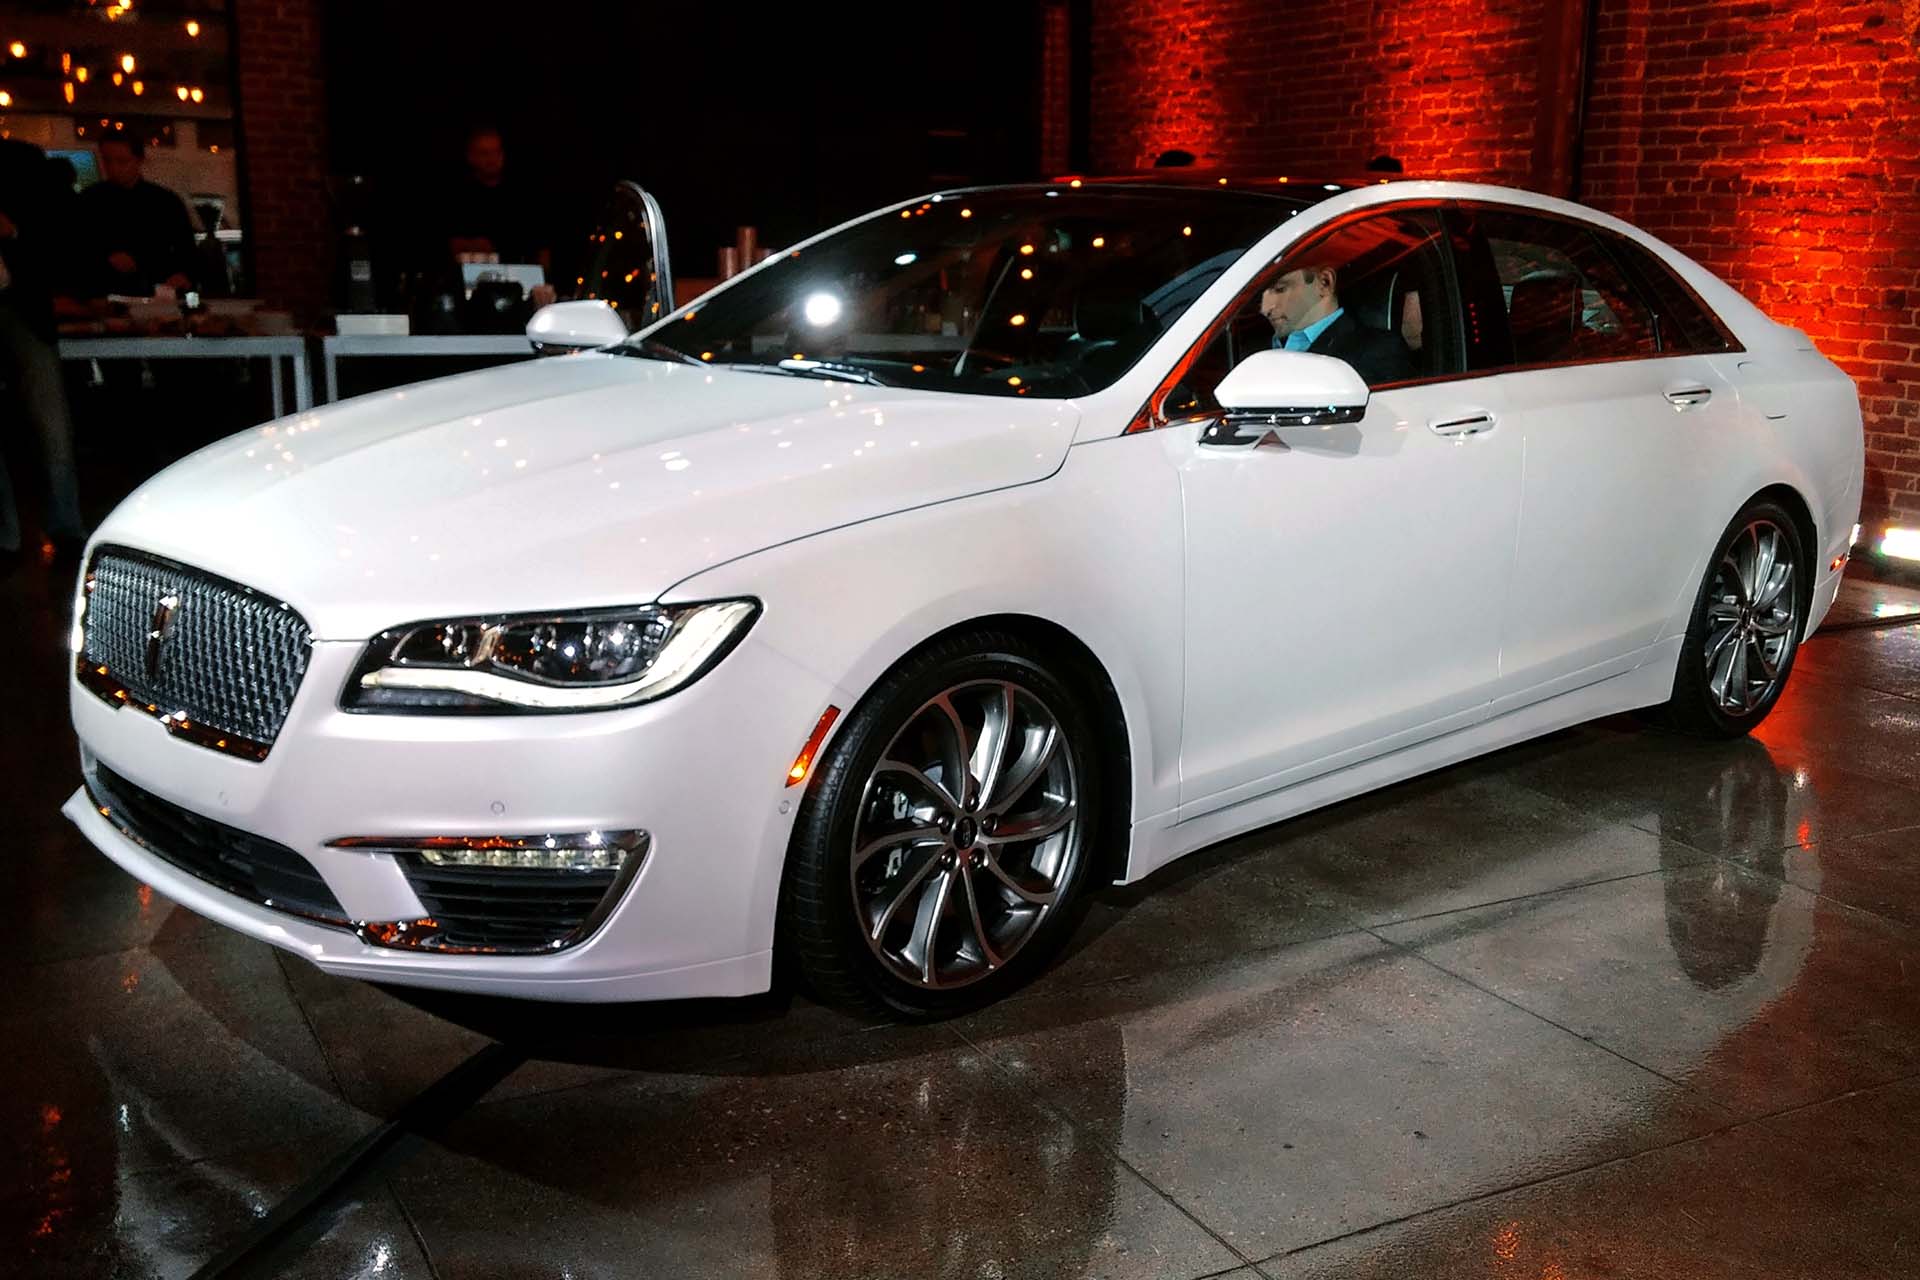 At the 2015 Los Angeles Auto Show, Lincoln showed the 2017 MKZ sedan, the first car to feature new front end styling inspired by the recent Continental Concept, which will soon migrate to the rest of the Lincoln lineup in an effort to give the brand a stronger identity and boost sales.